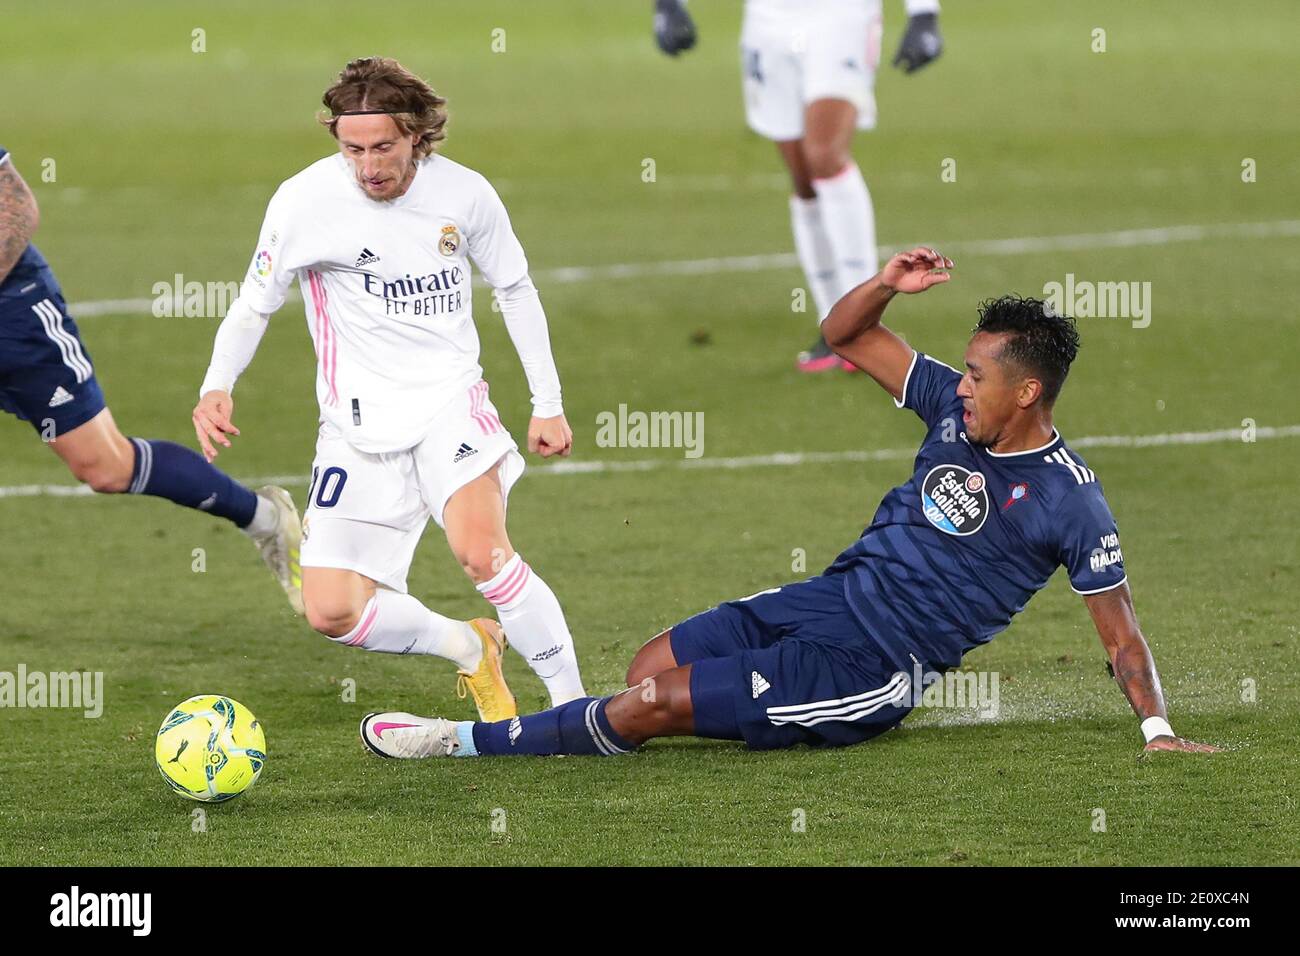 Madrid, Spain. 2nd Jan, 2021. Real Madrid's Luka Modric (L) vies with Celta Vigo's Renato Tapia during a Spanish league football match between Real Madrid and Celta Vigo in Madrid, Spain, on Jan. 2, 2021. Credit: Edward F. Peters/Xinhua/Alamy Live News Stock Photo